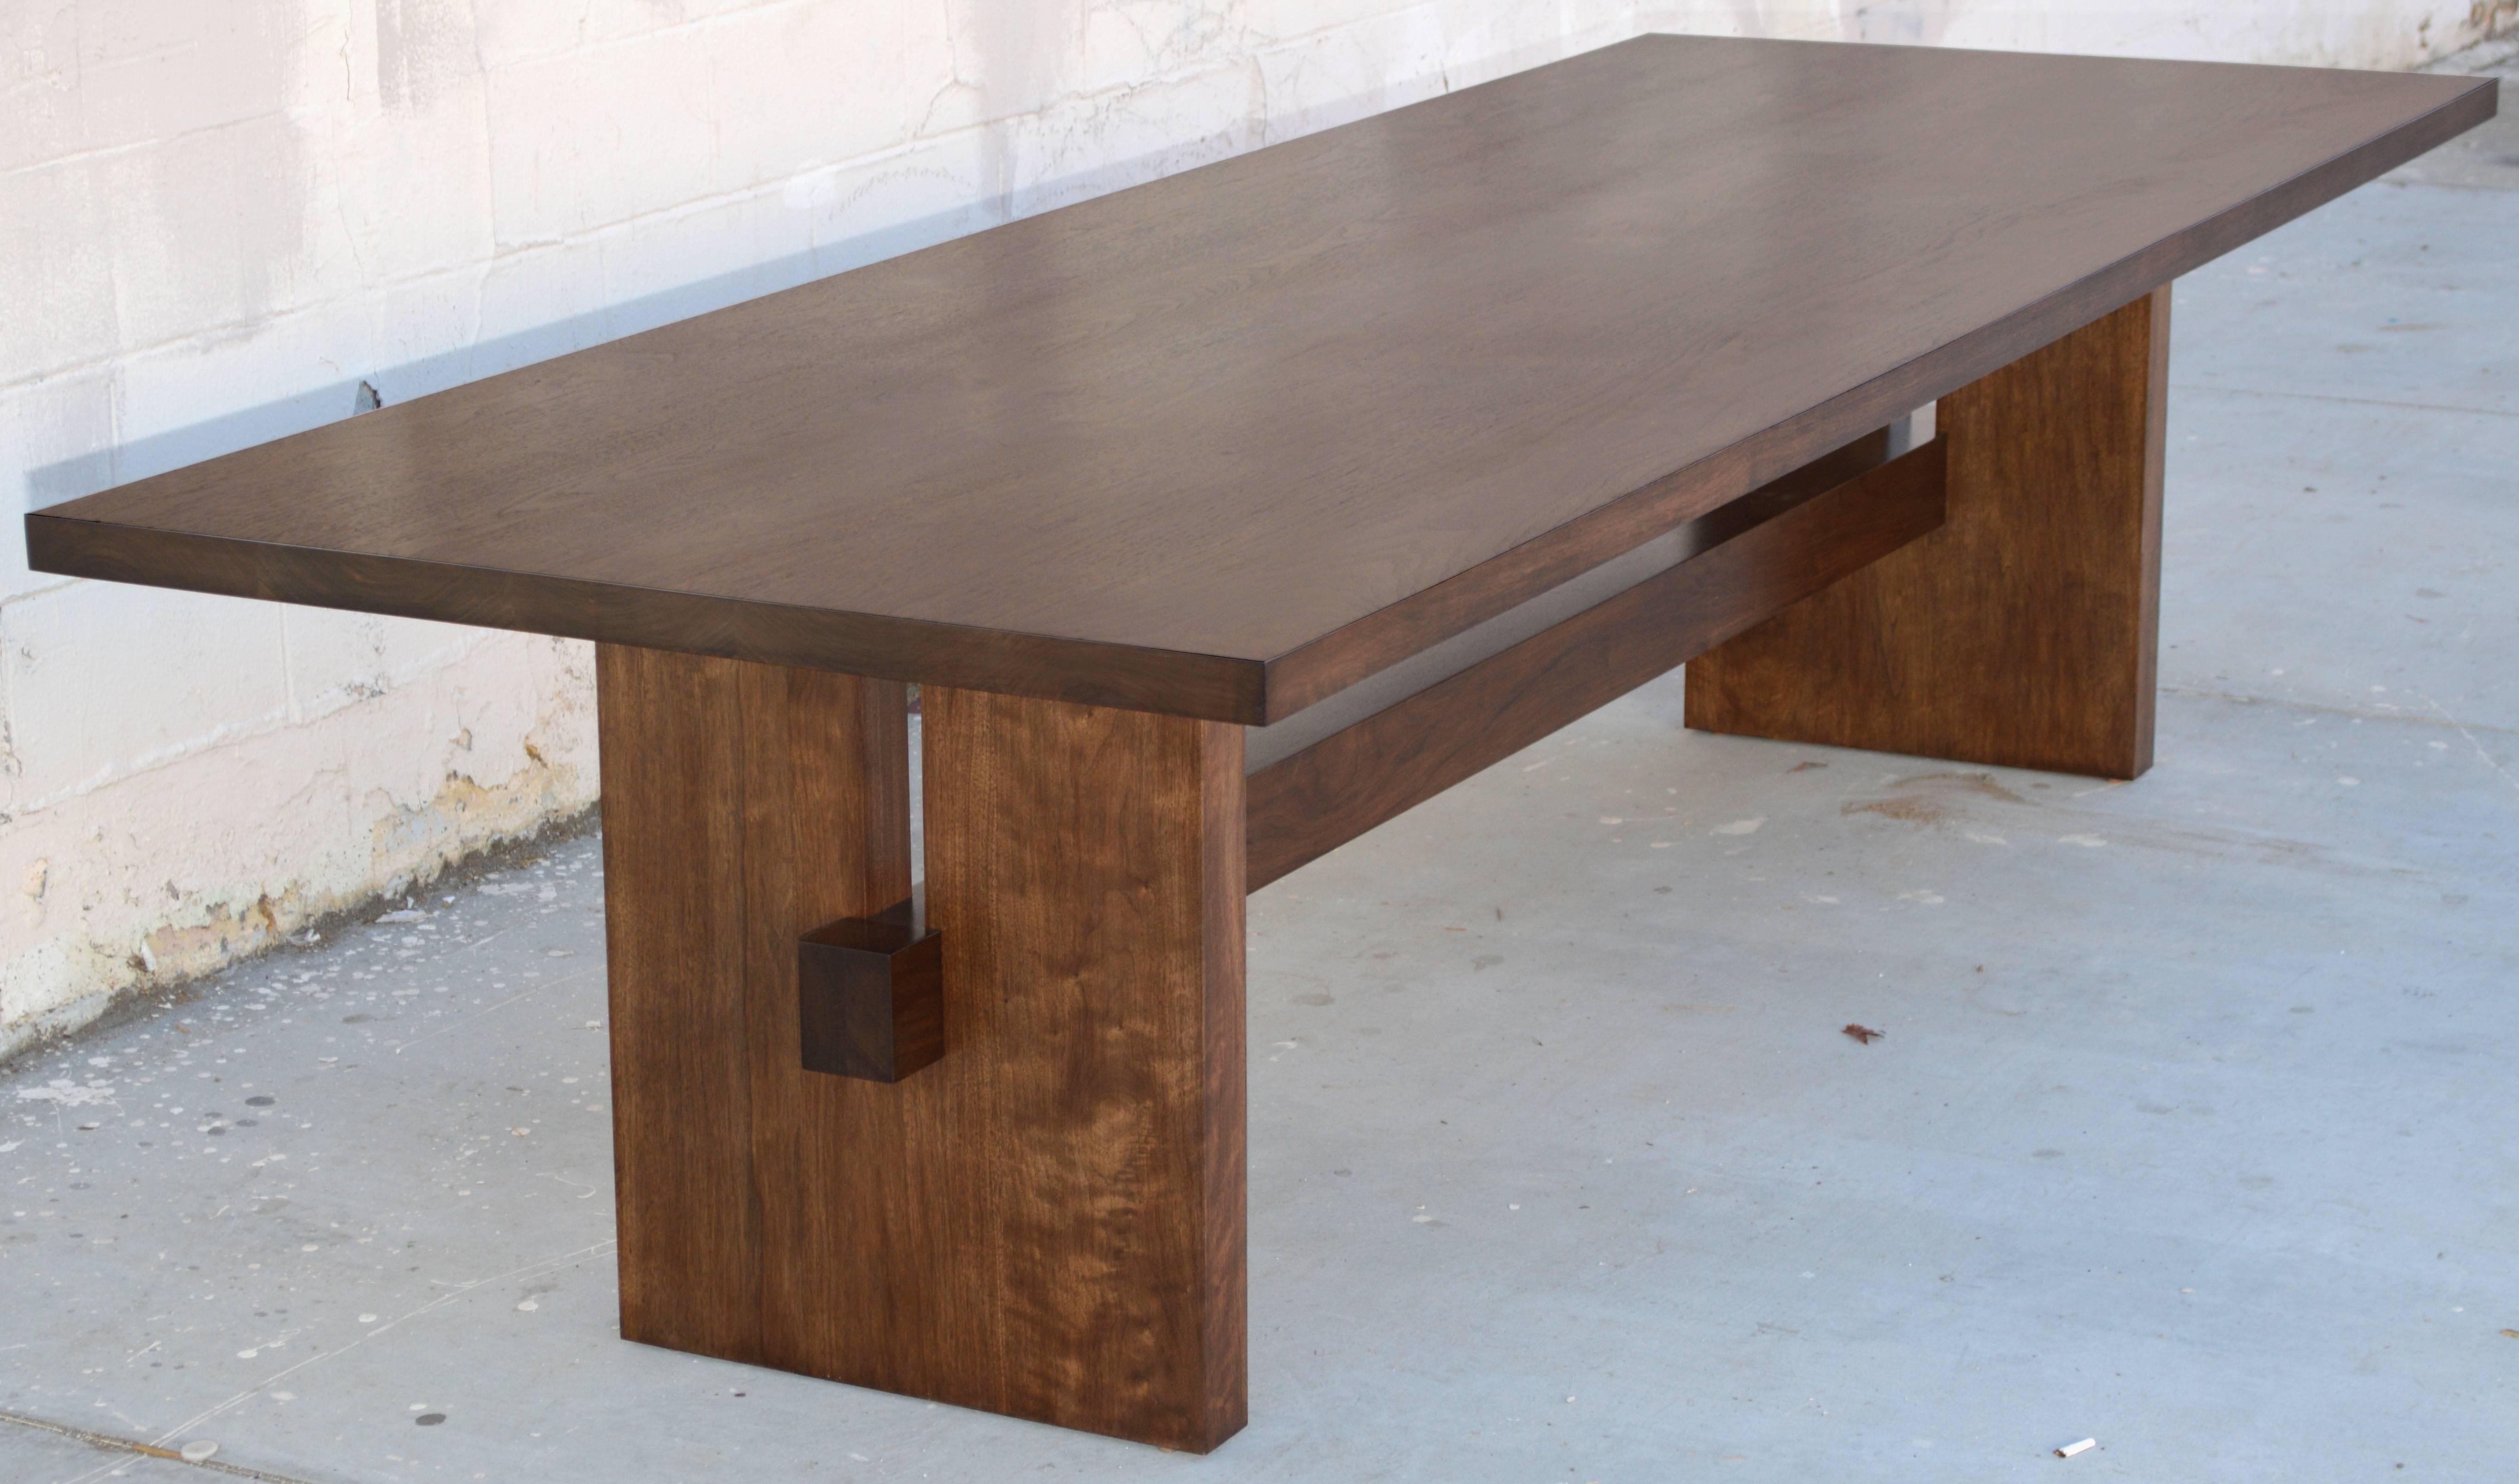 This walnut dining table is fully collapsible in four parts, no tools required. The top is 2